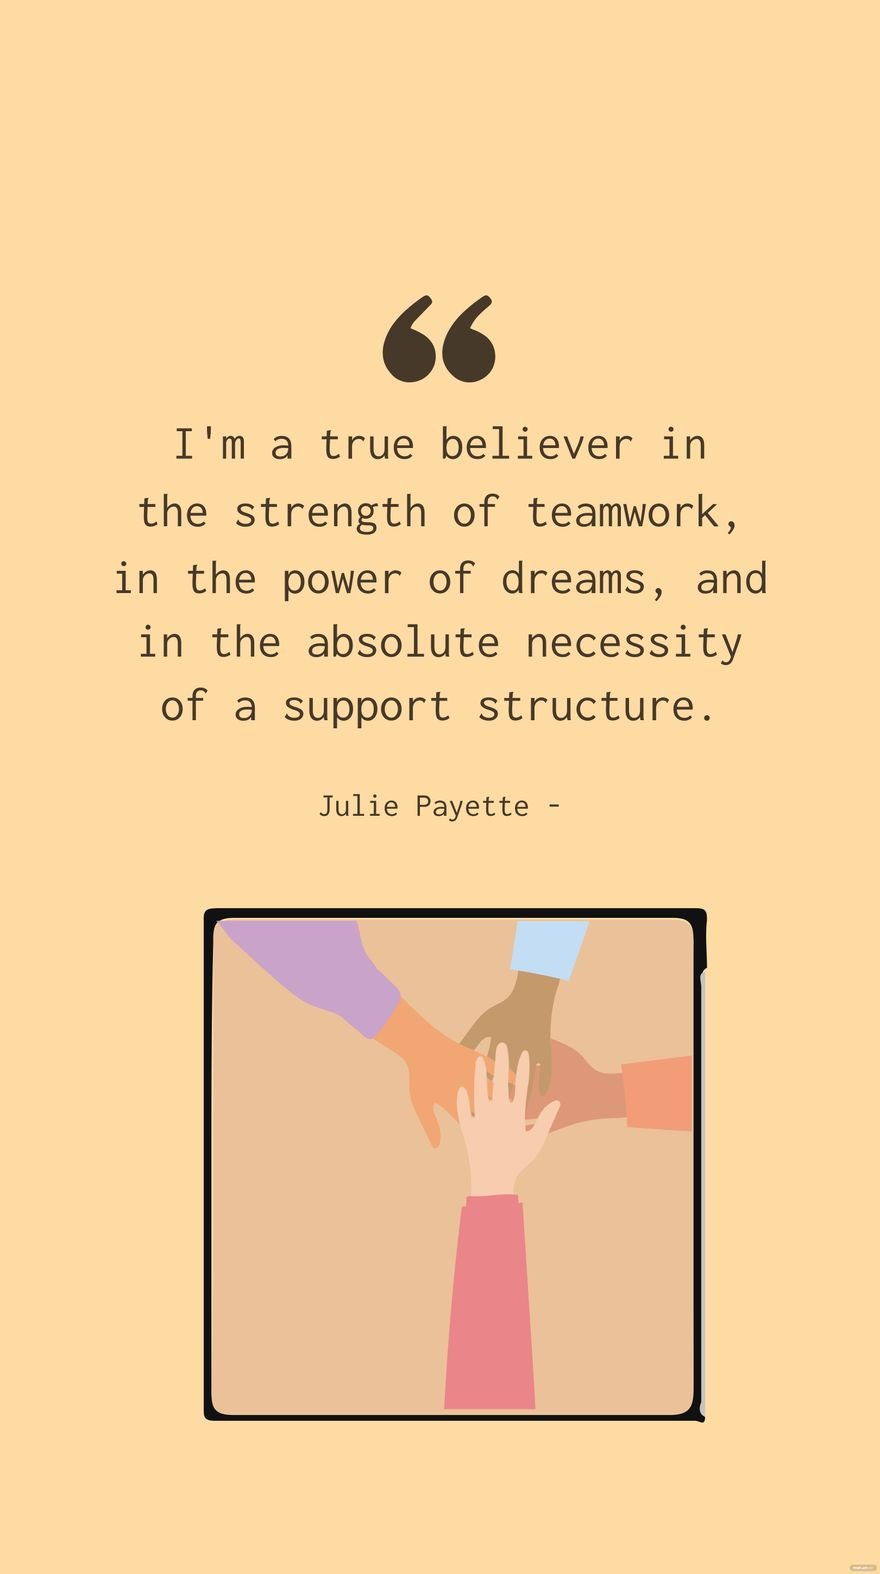 Free Julie Payette - I'm a true believer in the strength of teamwork, in the power of dreams, and in the absolute necessity of a support structure.